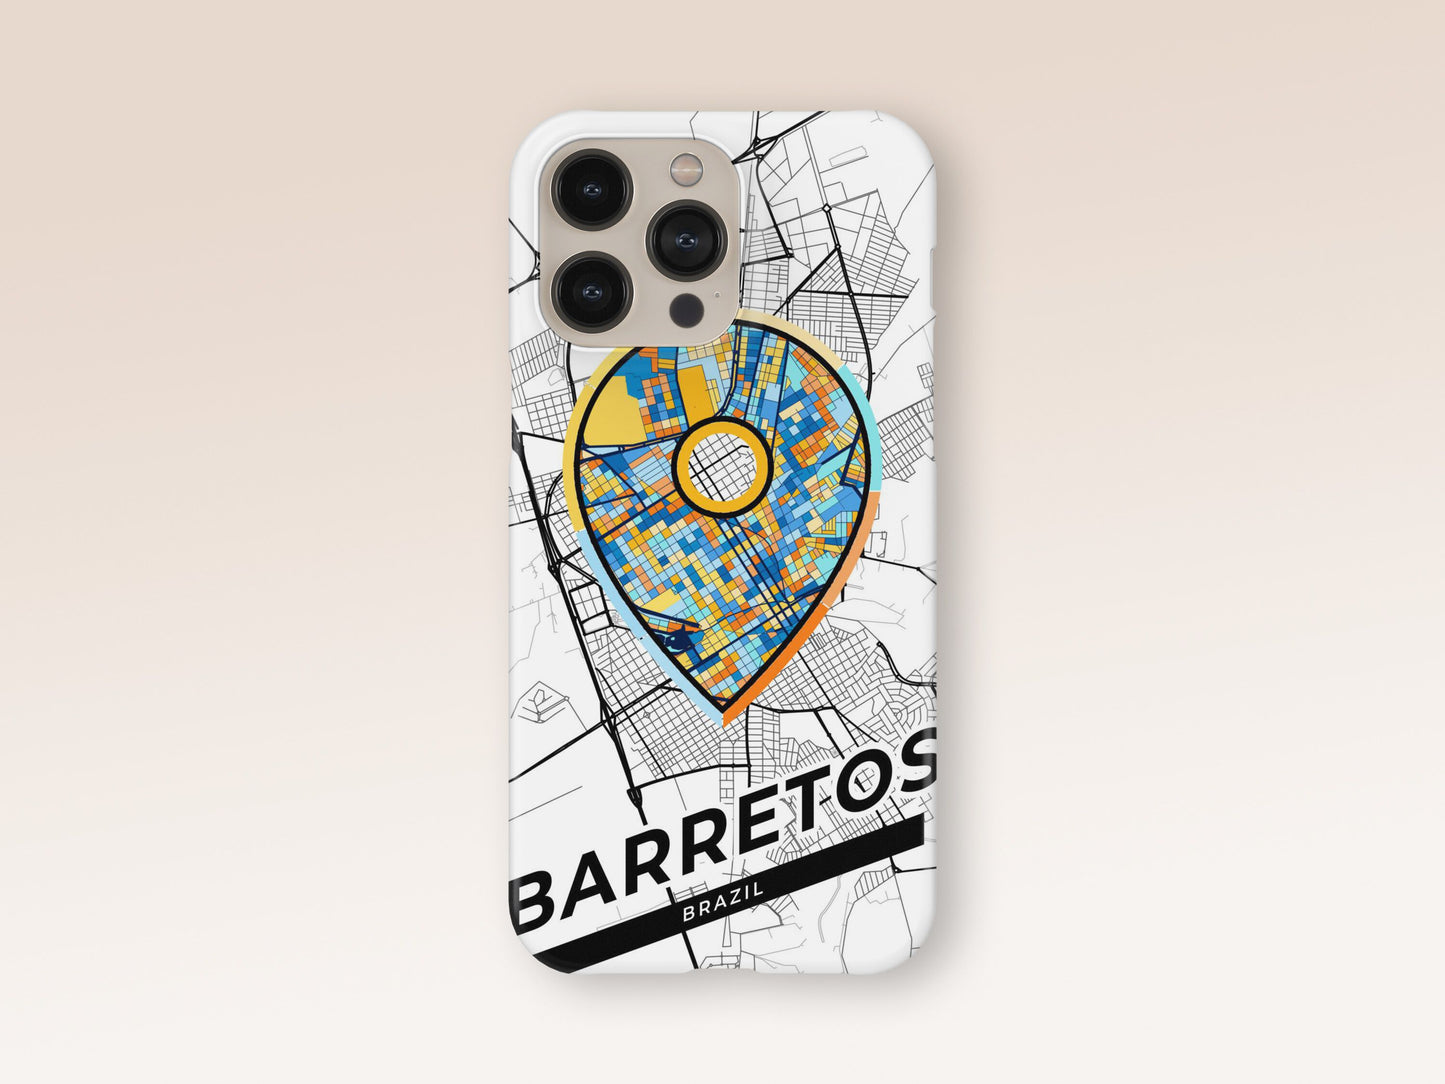 Barretos Brazil slim phone case with colorful icon. Birthday, wedding or housewarming gift. Couple match cases. 1